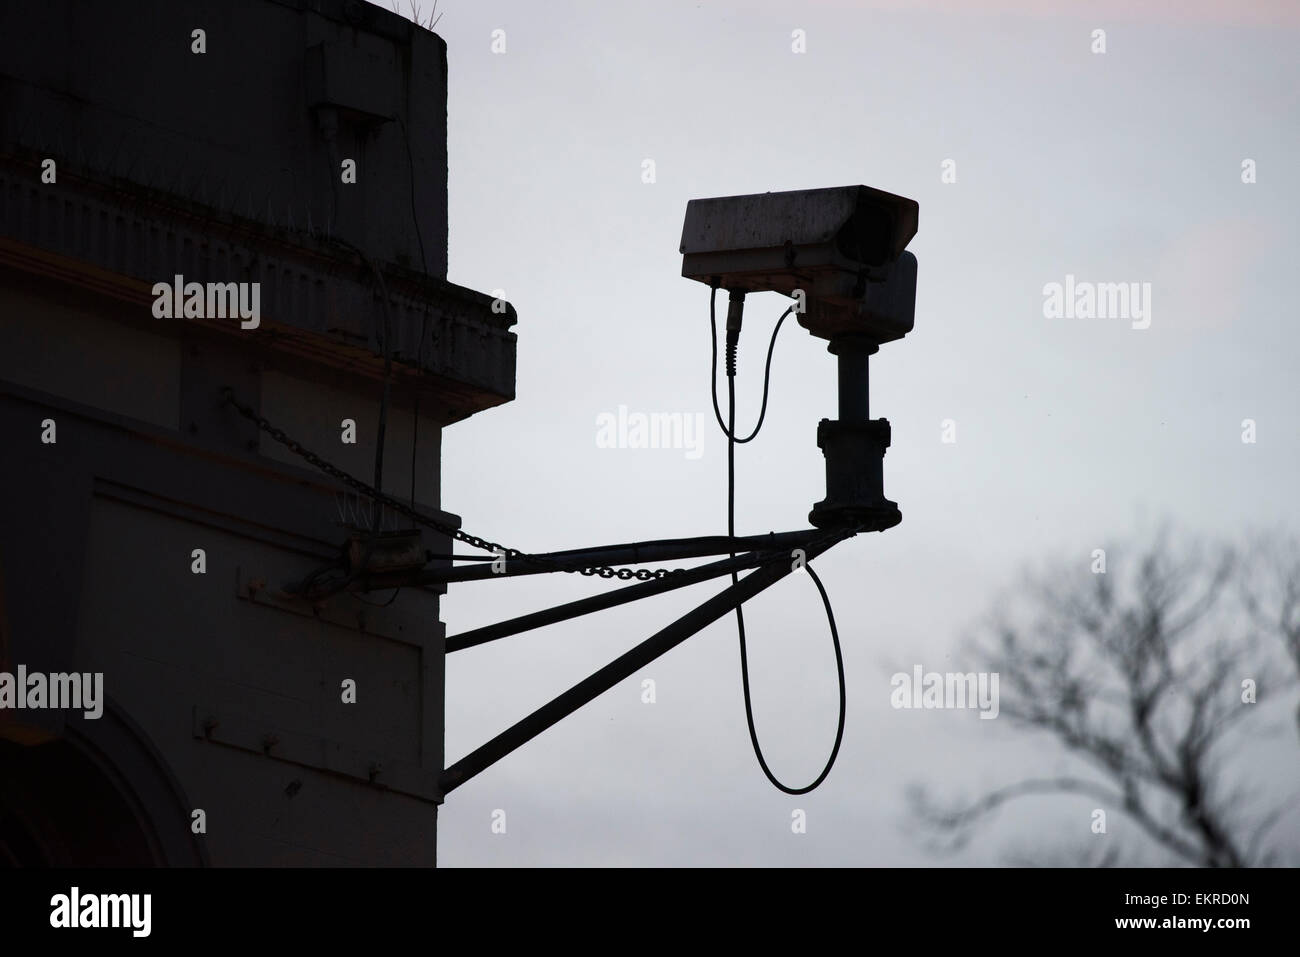 A CCTV security camera silhouetted in a city centre. Stock Photo